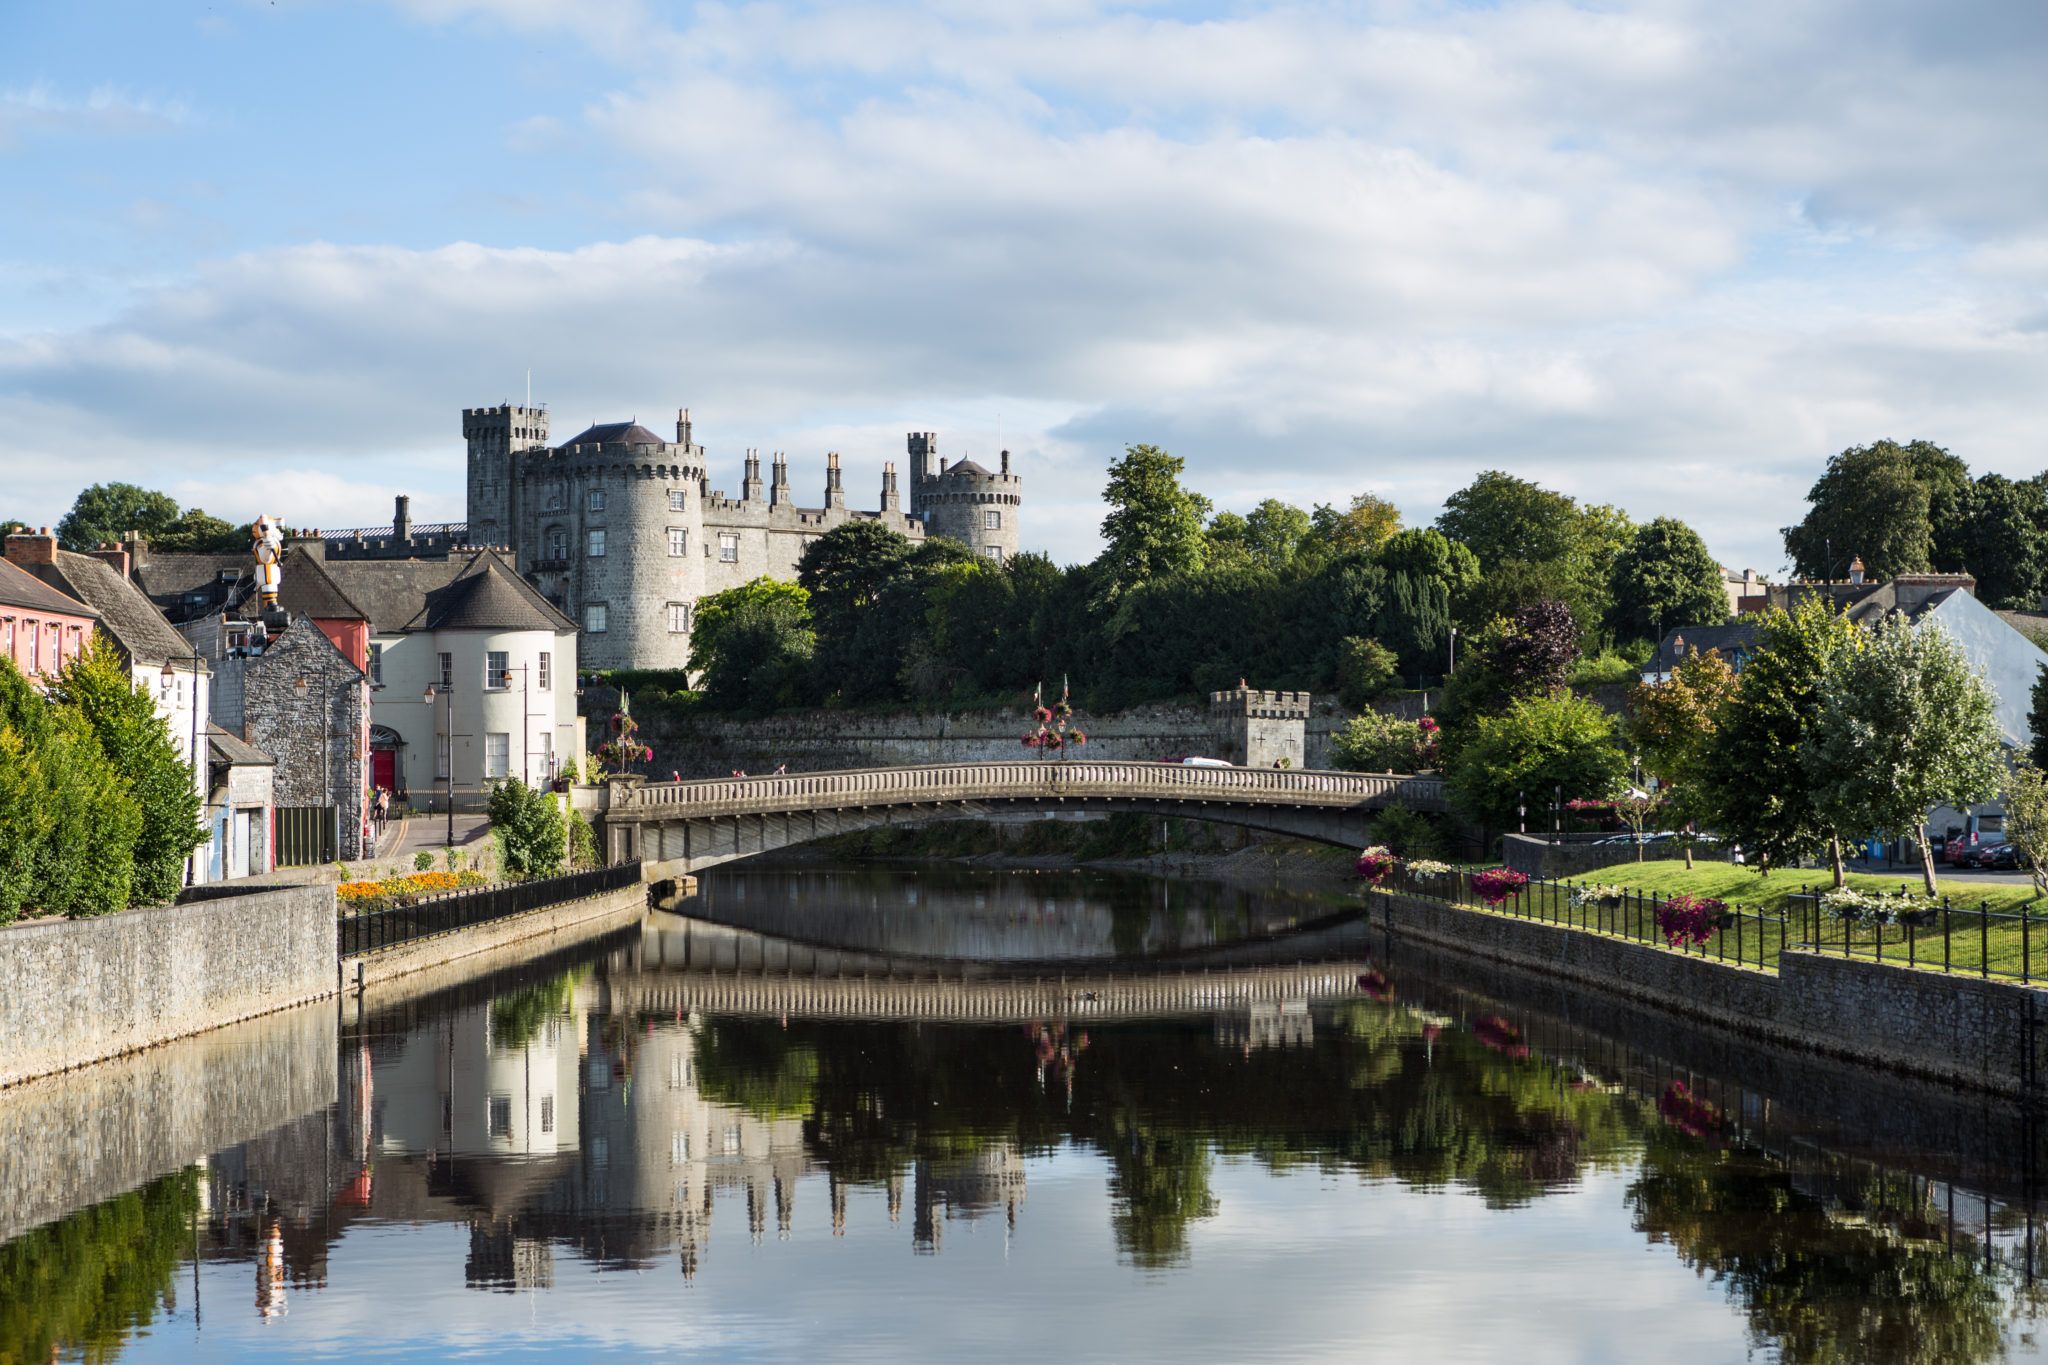 Not Your Average Staycation: There's nothing average about Kilkenny